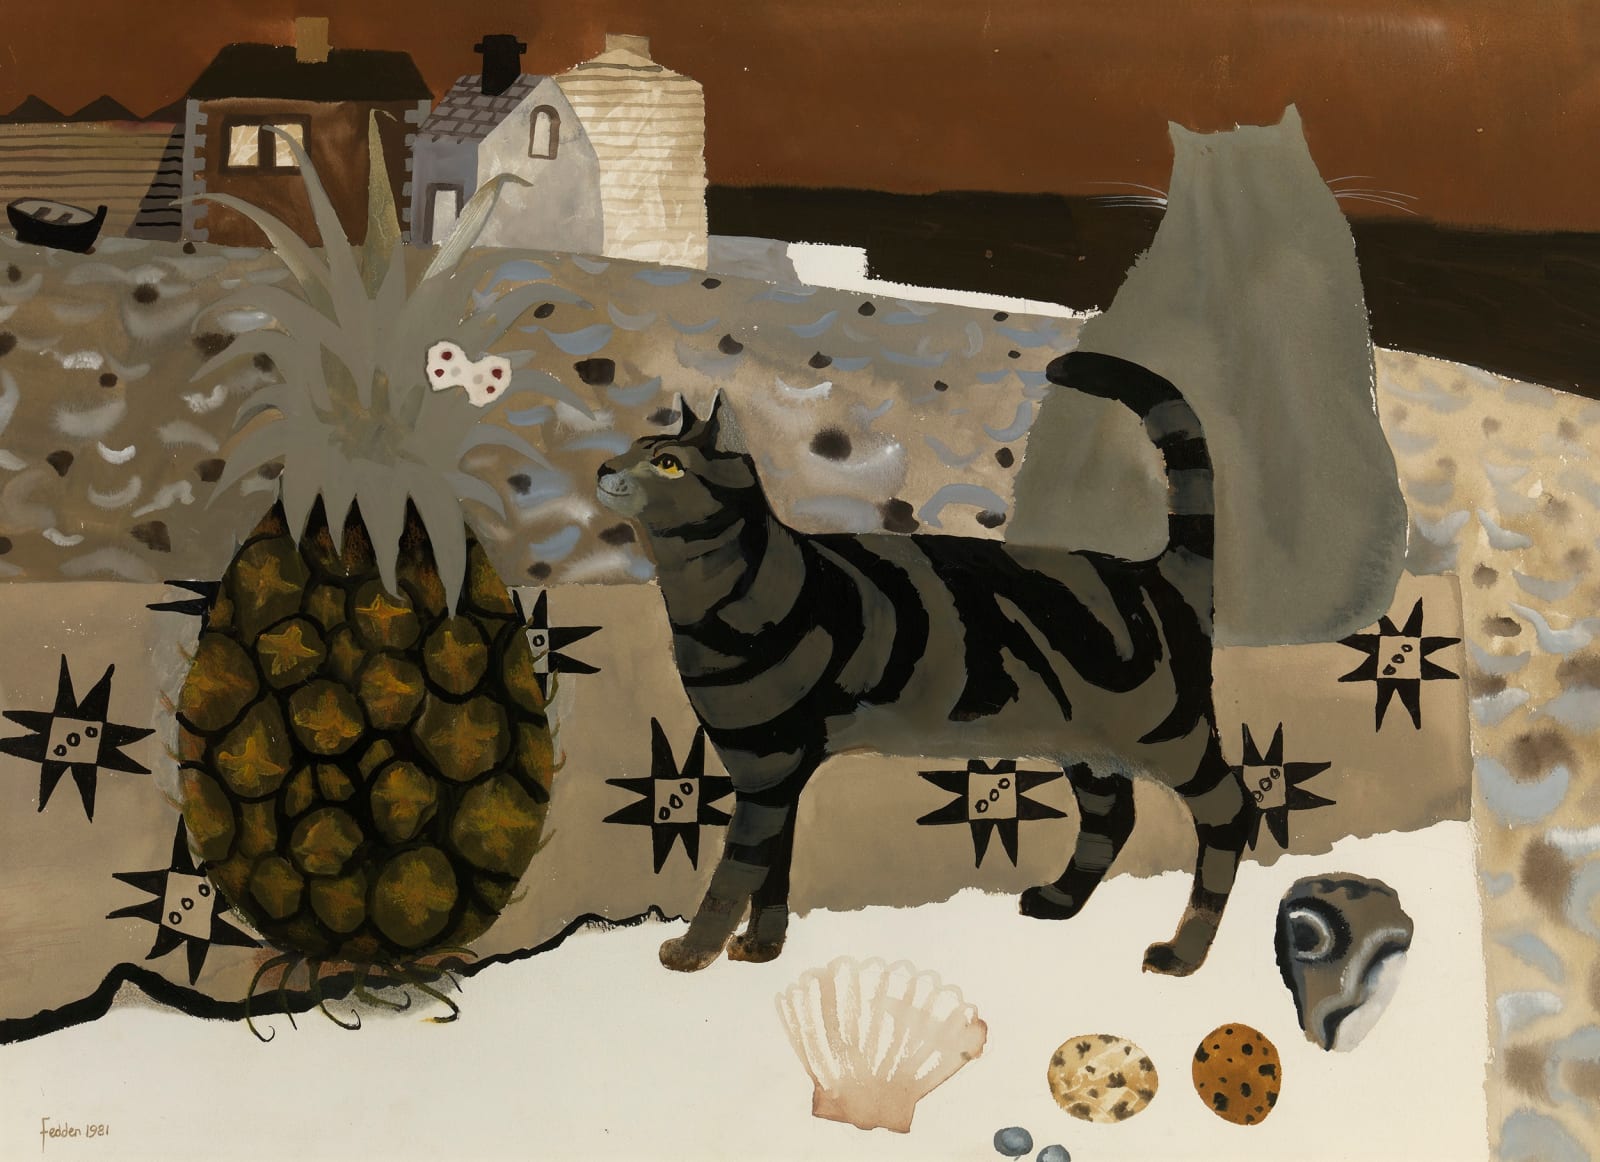 Mary Fedden, Cats on a table with a pineapple, 1981